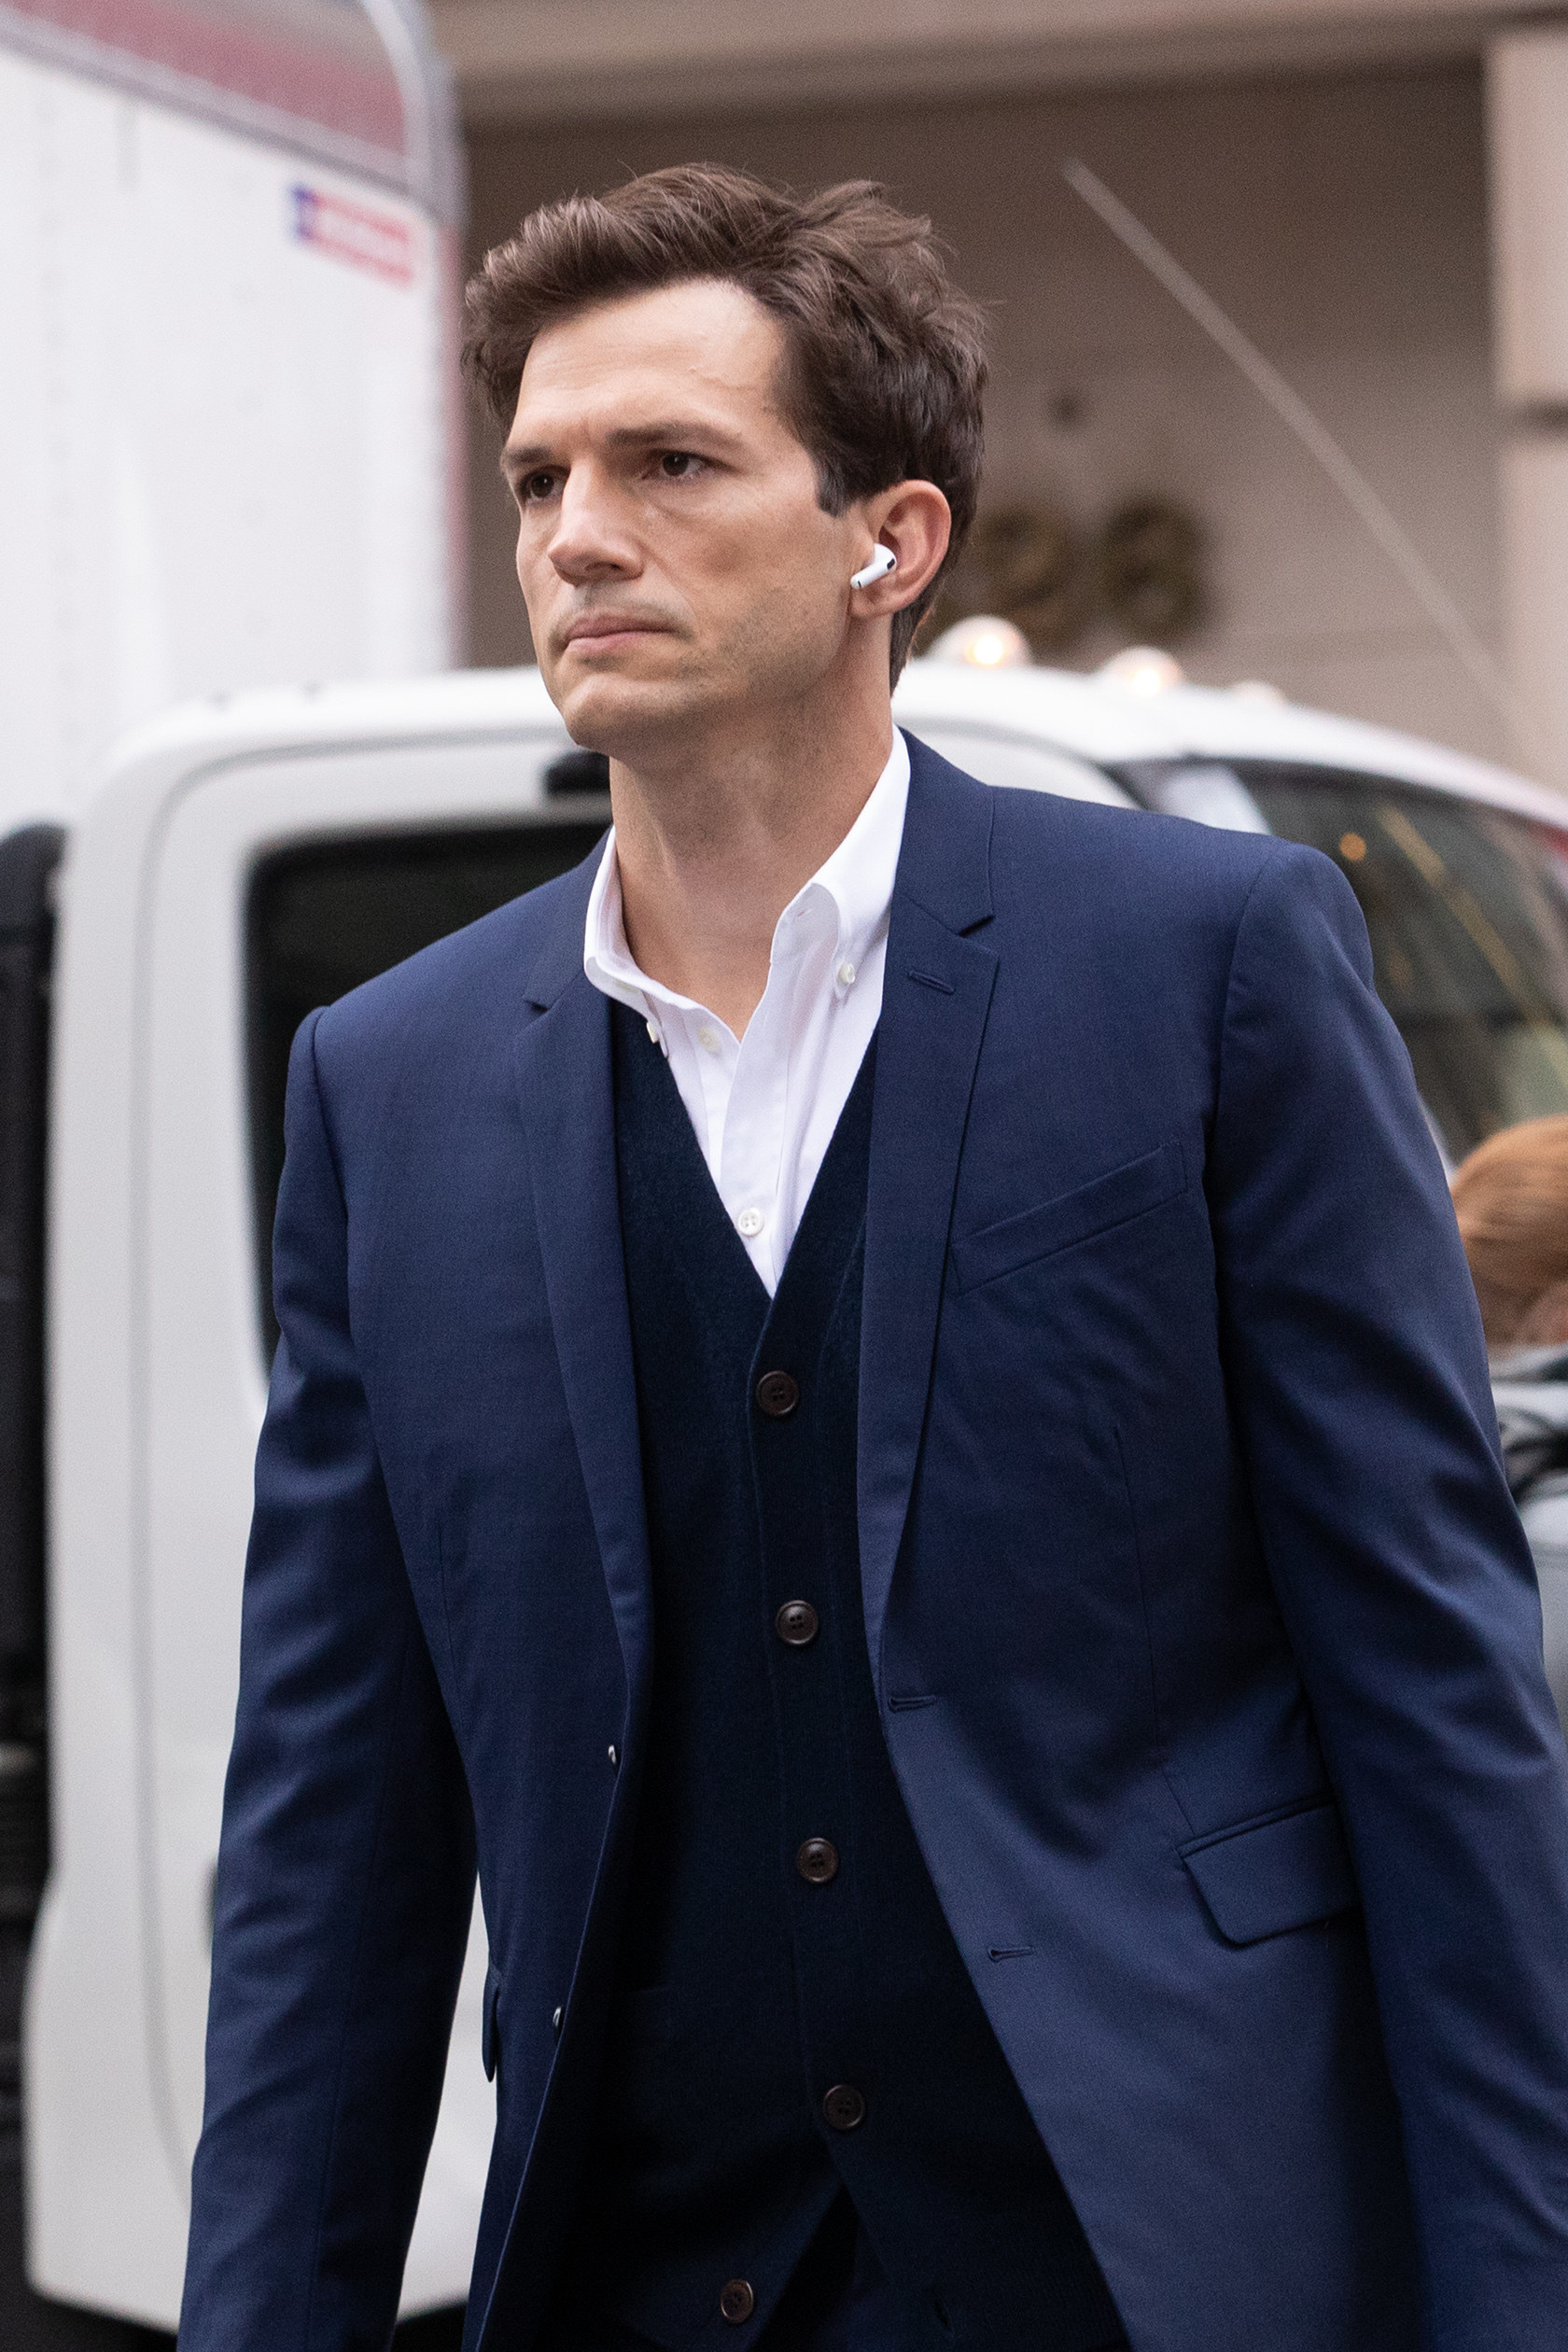 Ashton Kutcher walks down a city street in a blue suit, with Airpods in